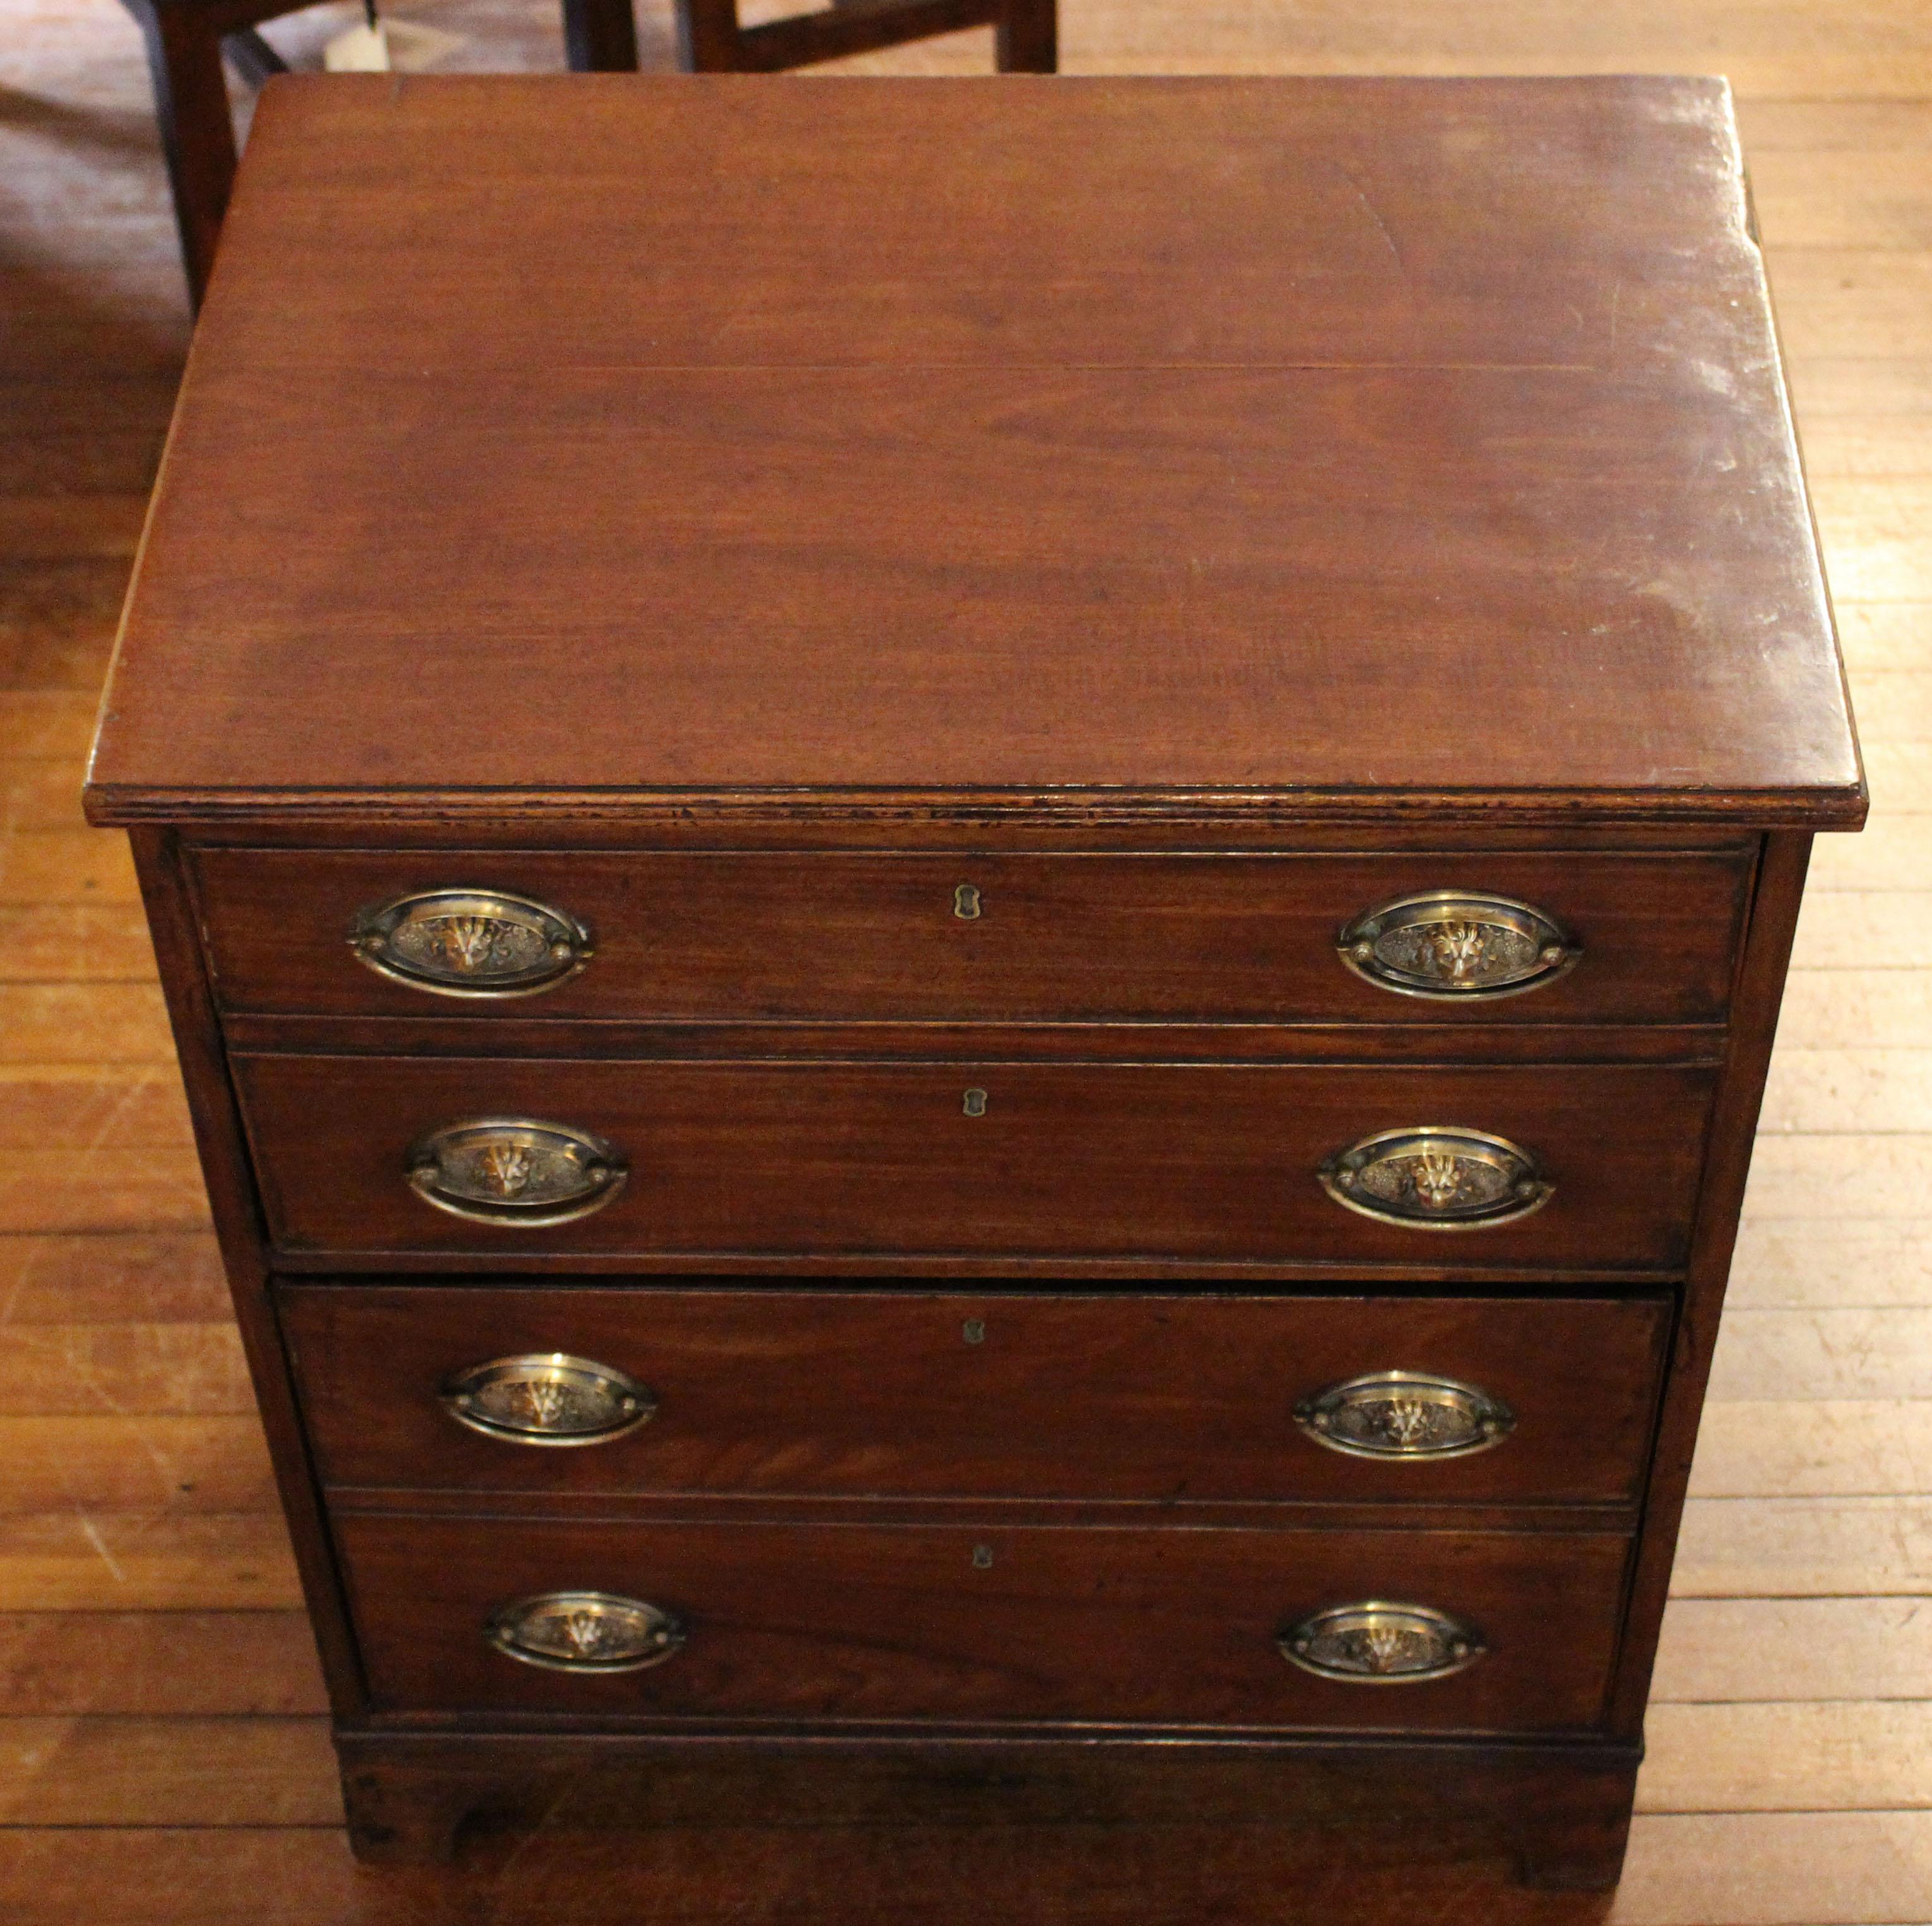 Late 18th century Georgian small chest of drawers raised on shaped bracket feet. Reeded top and base moldings. English. Lion mask oval brass pulls. Converted from a lift top commode to two deep drawers each with two faux drawer fronts. Measures: 25